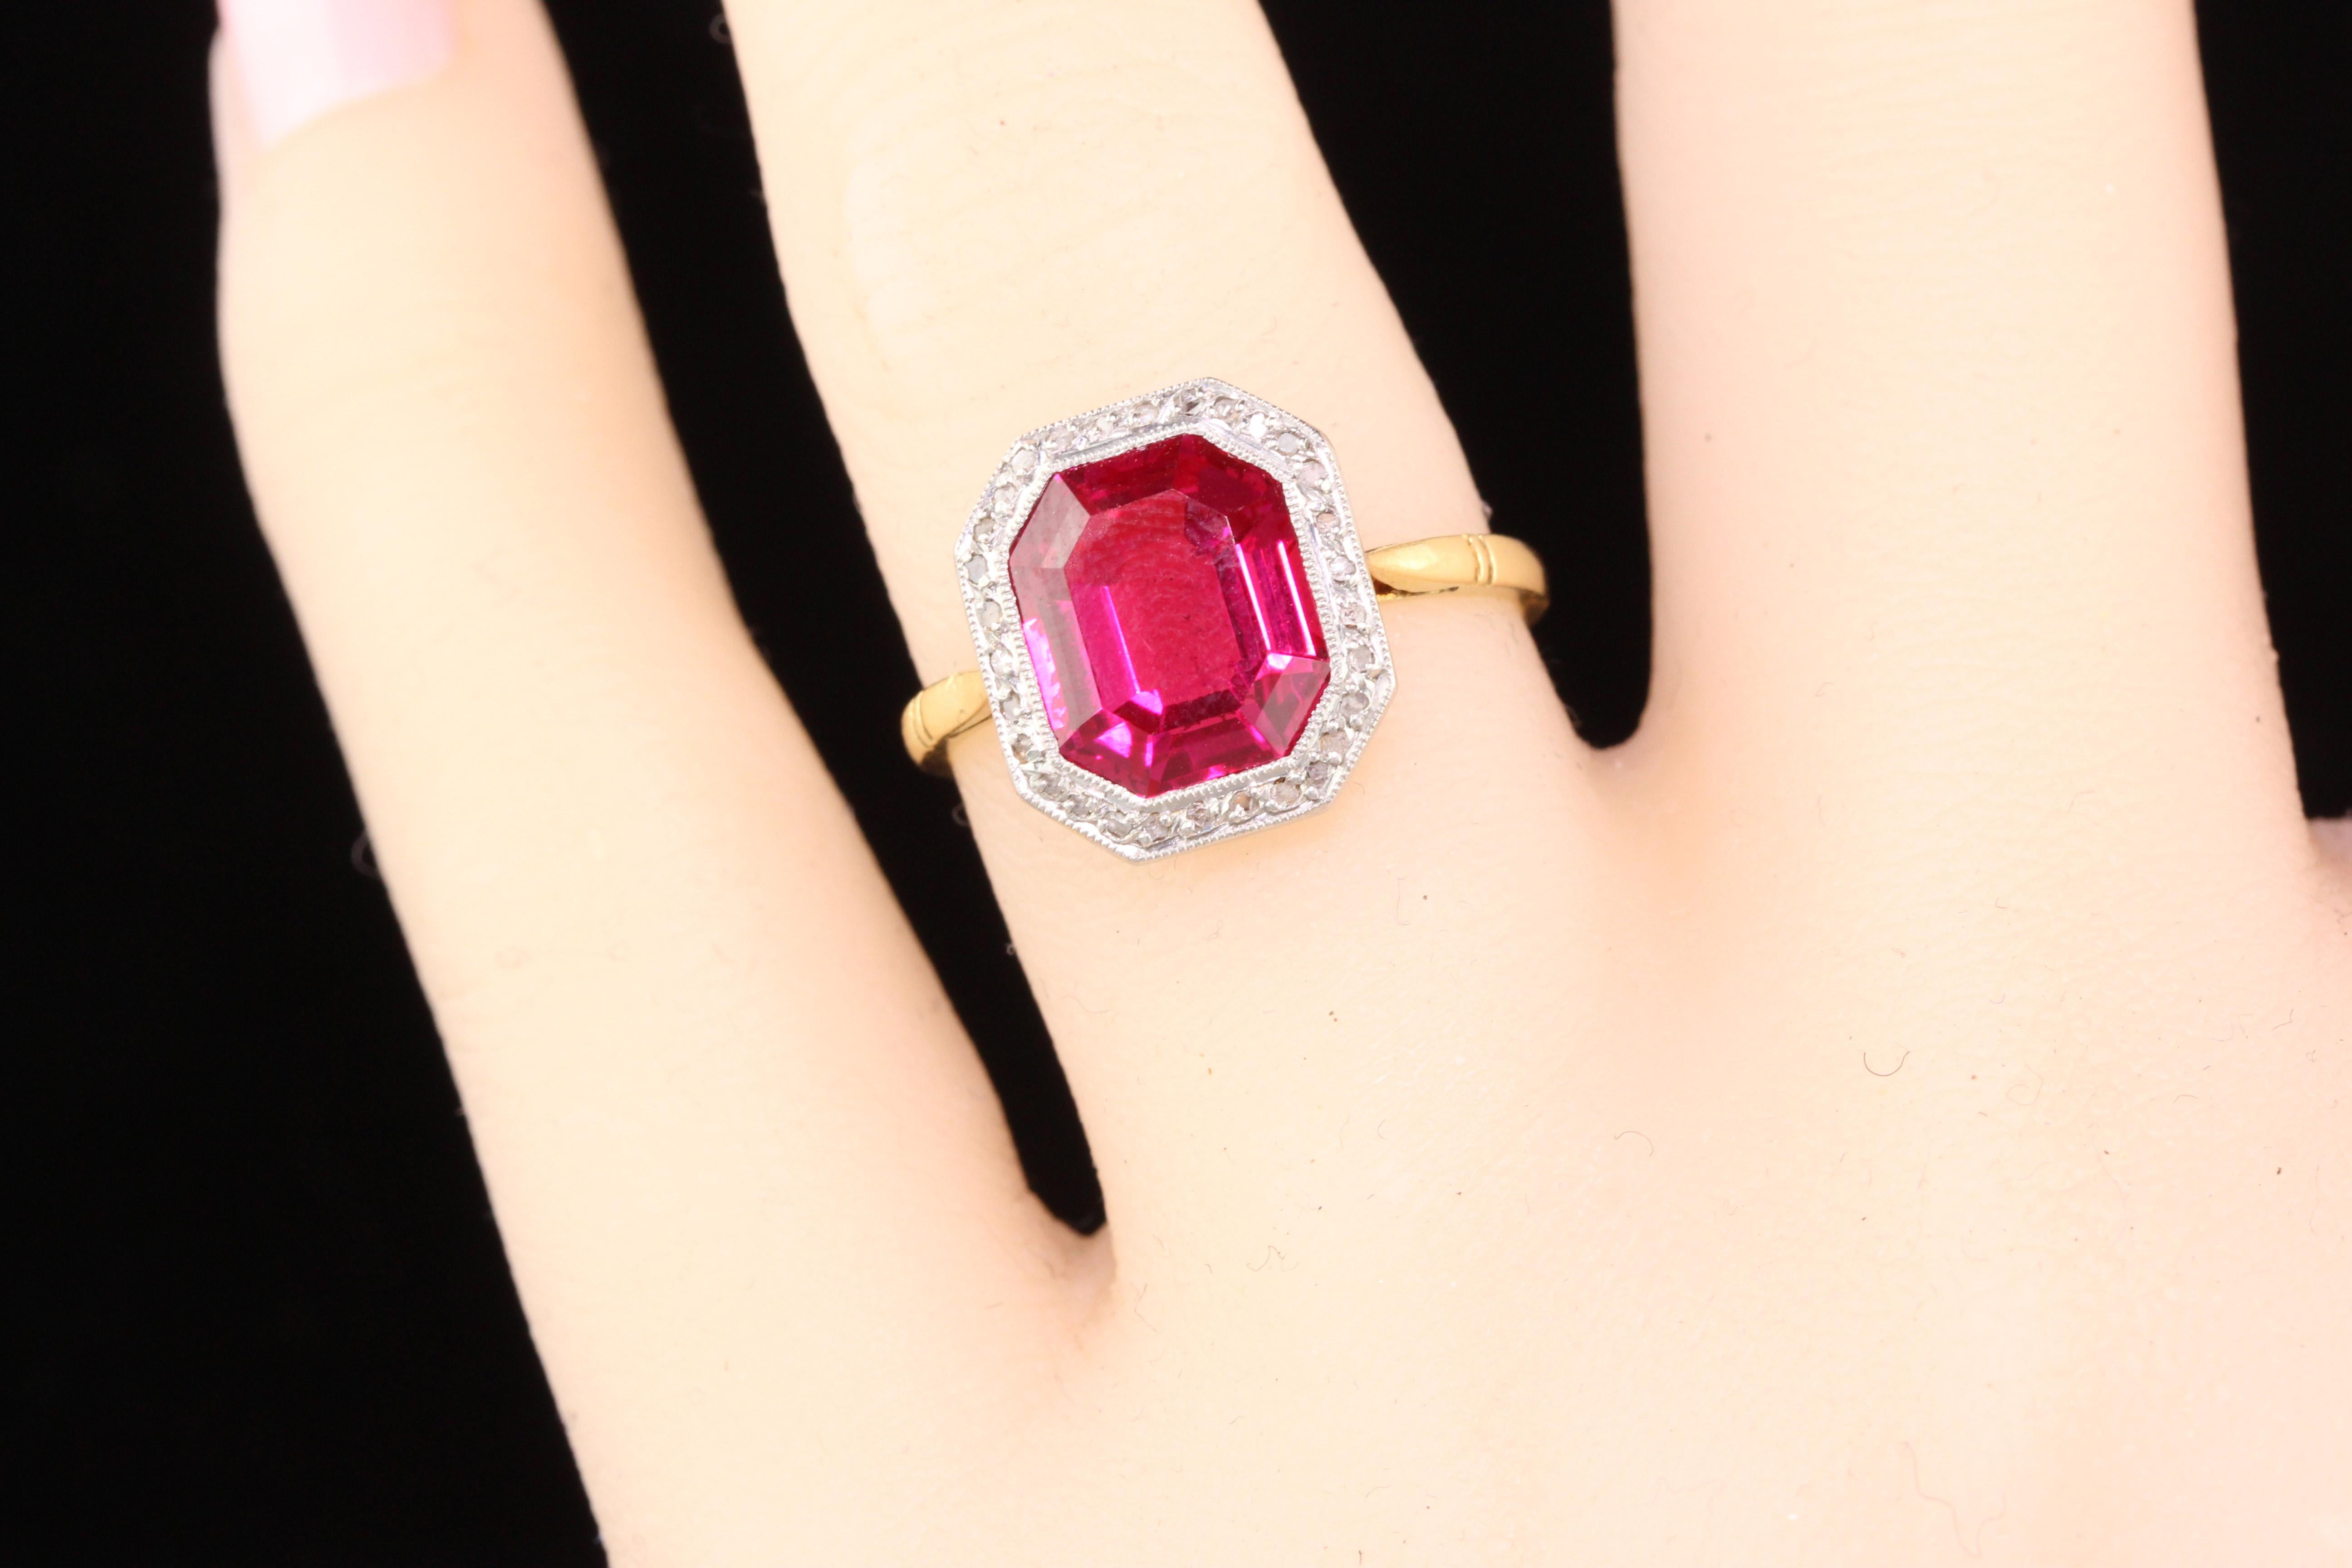 Antique Edwardian 18 Karat Gold French Synthetic Ruby and Diamond Cocktail Ring 1